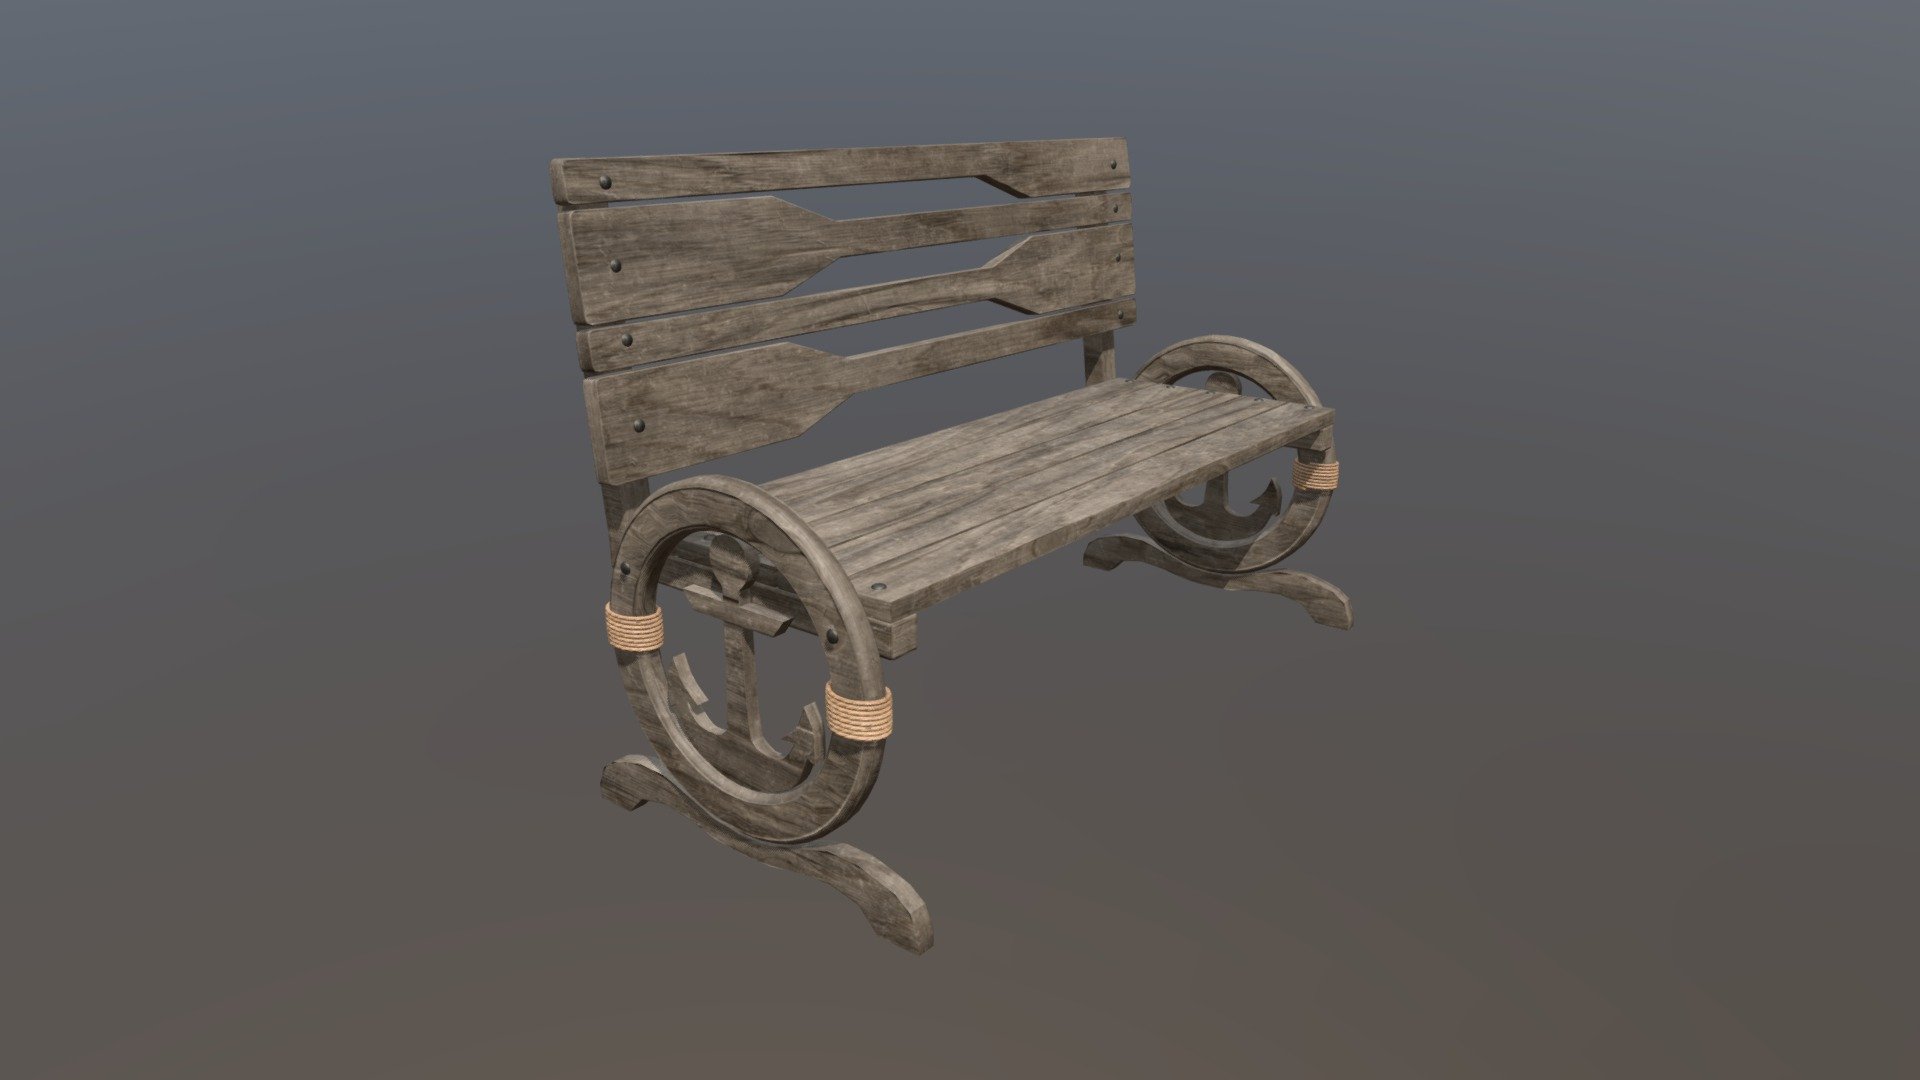 This is a bench that was created in a live stream from YouTube.

https://www.youtube.com/channel/UC5FWcV9We7DCh6IF-maSrrA - Nautical Bar Bench - 3D model by Denis Keman (@vilesting) 3d model